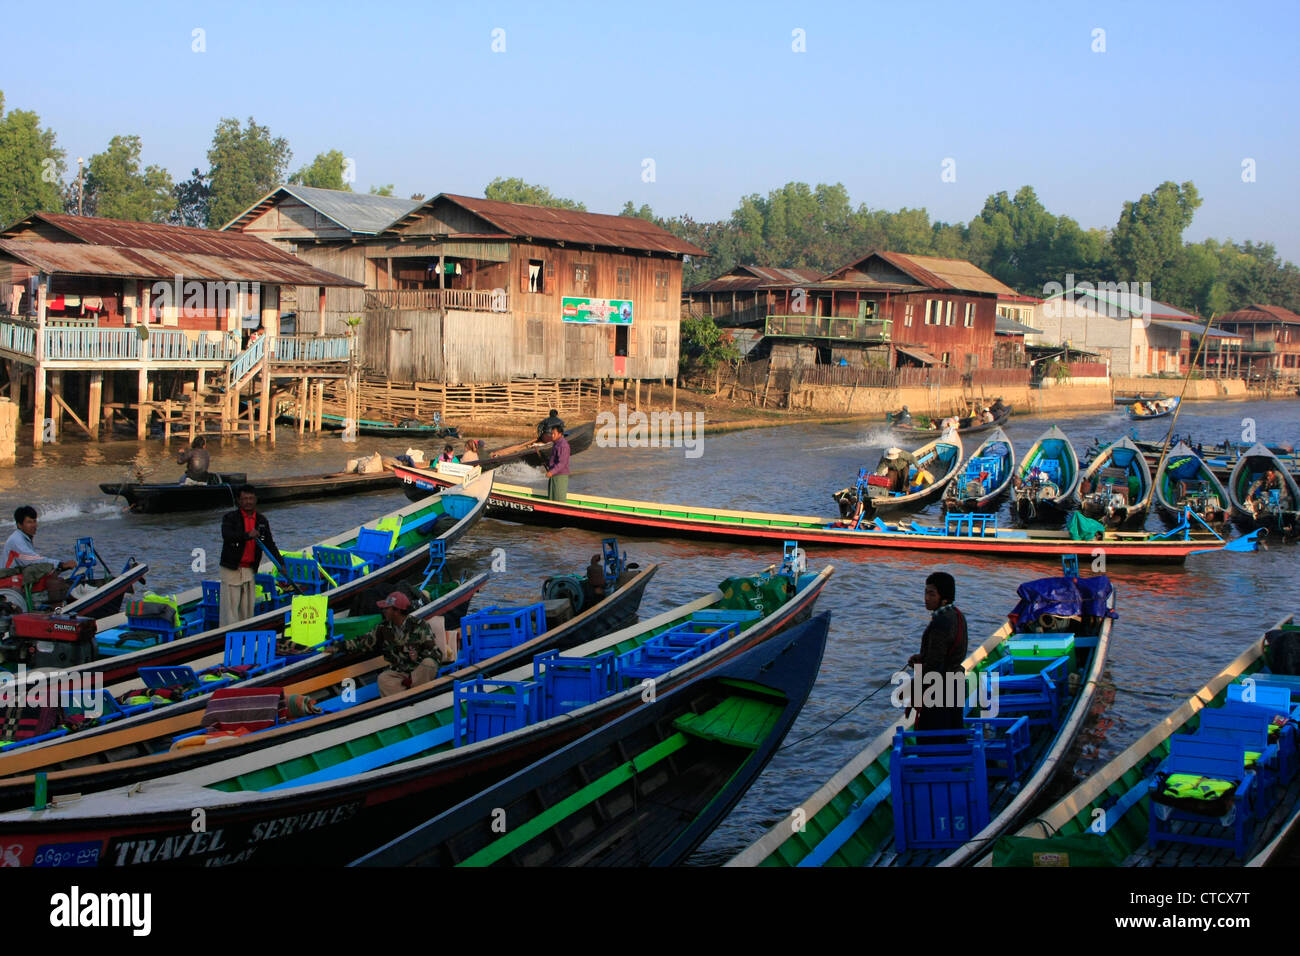 Boats waiting for tourists, Nyaung Shwe, Inle lake, Shan state, Myanmar, Southeast Asia Stock Photo